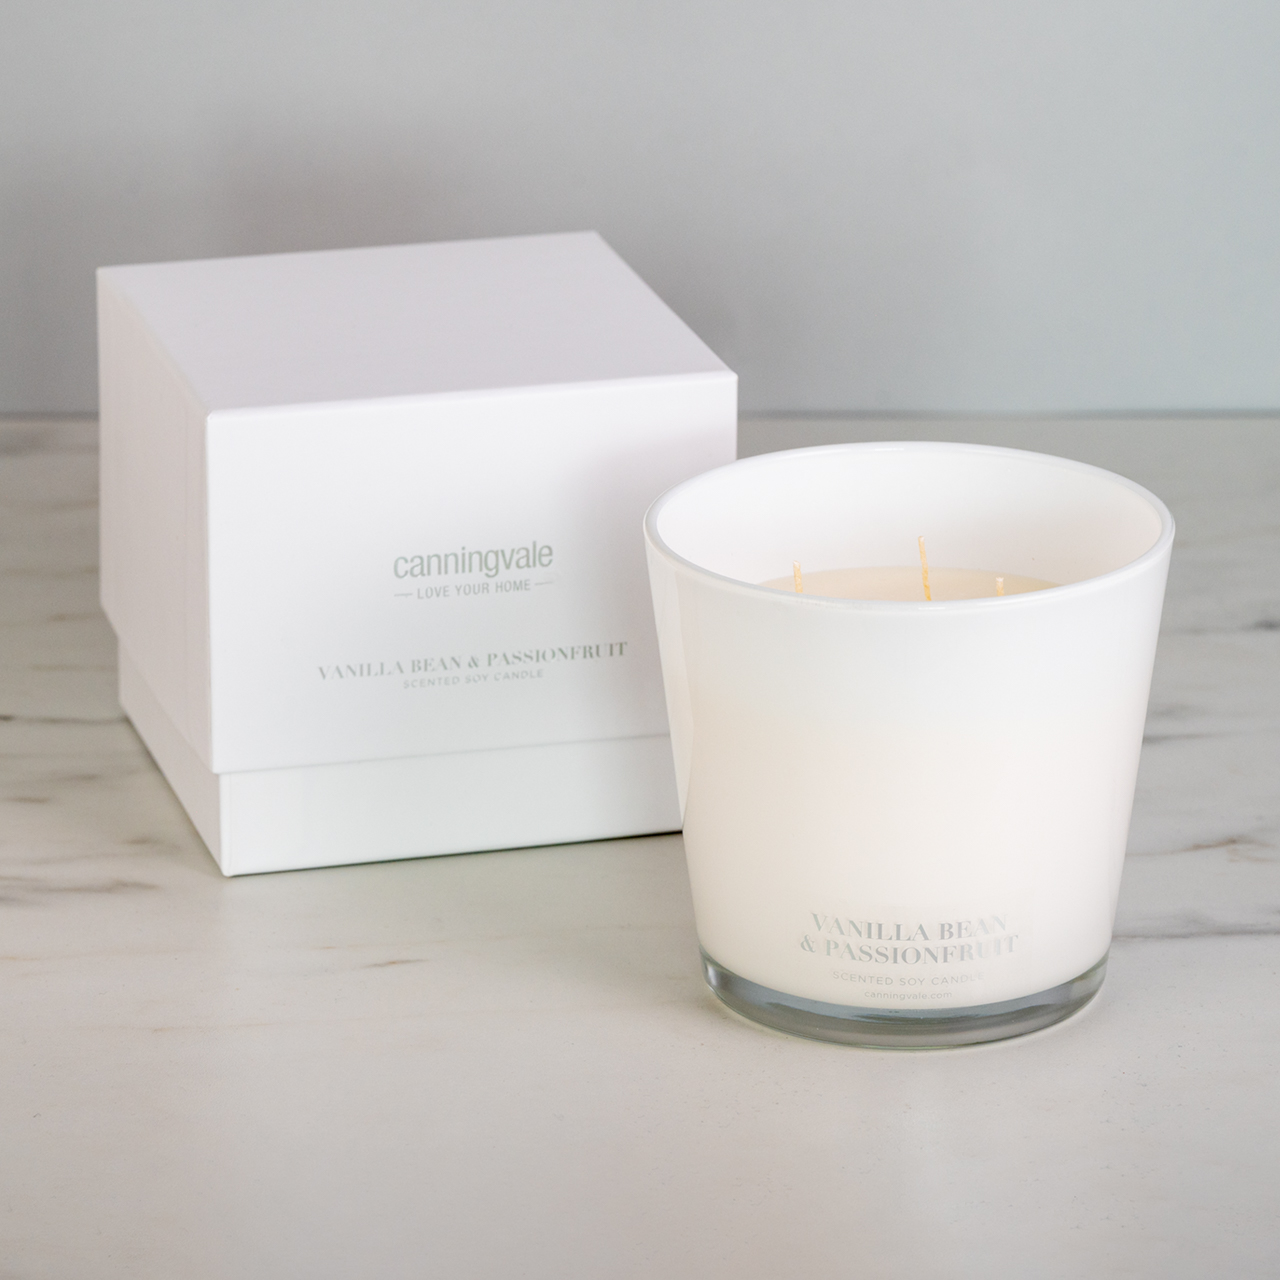 Extra Large 3 Wick Soy Wax Candle - Vanilla Bean & Passionfruit